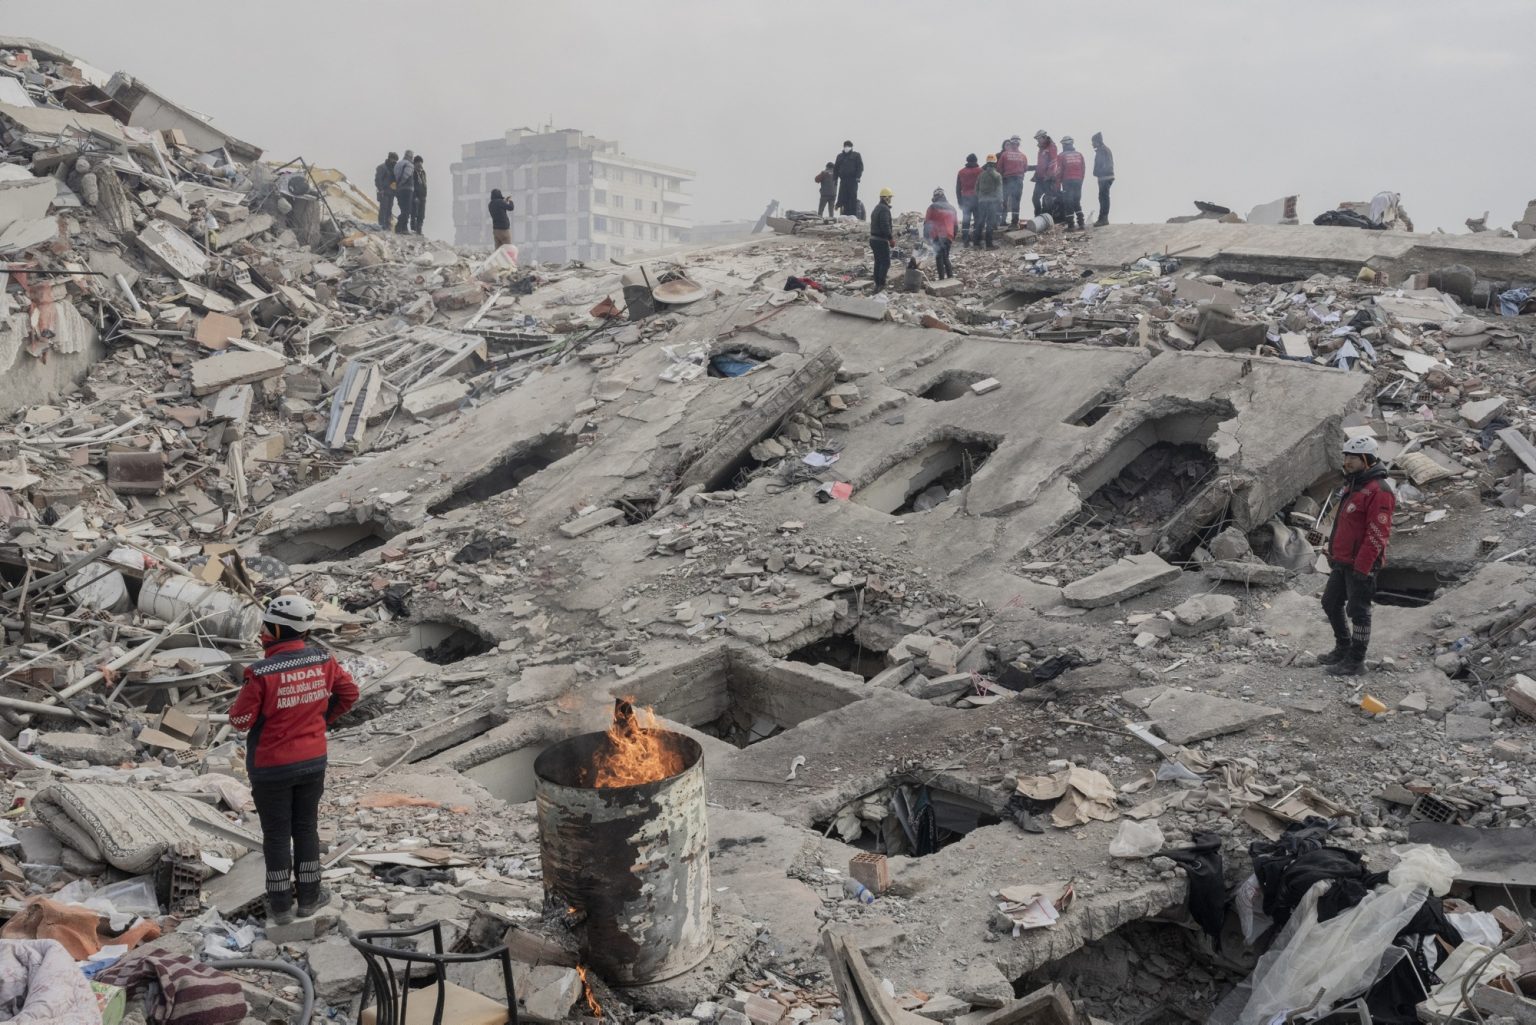 Kahramanmaras¸, Turkey, February 2023 - The aftermath of the earthquake that hit southern Turkey and northern Syria.     Rescuers over what remains of a collapsed building. ><
Kahramanmaras¸, Turchia, febbraio 2023  Le conseguenze del terremoto che ha colpito la Turchia del Sud e la Siria del nord.